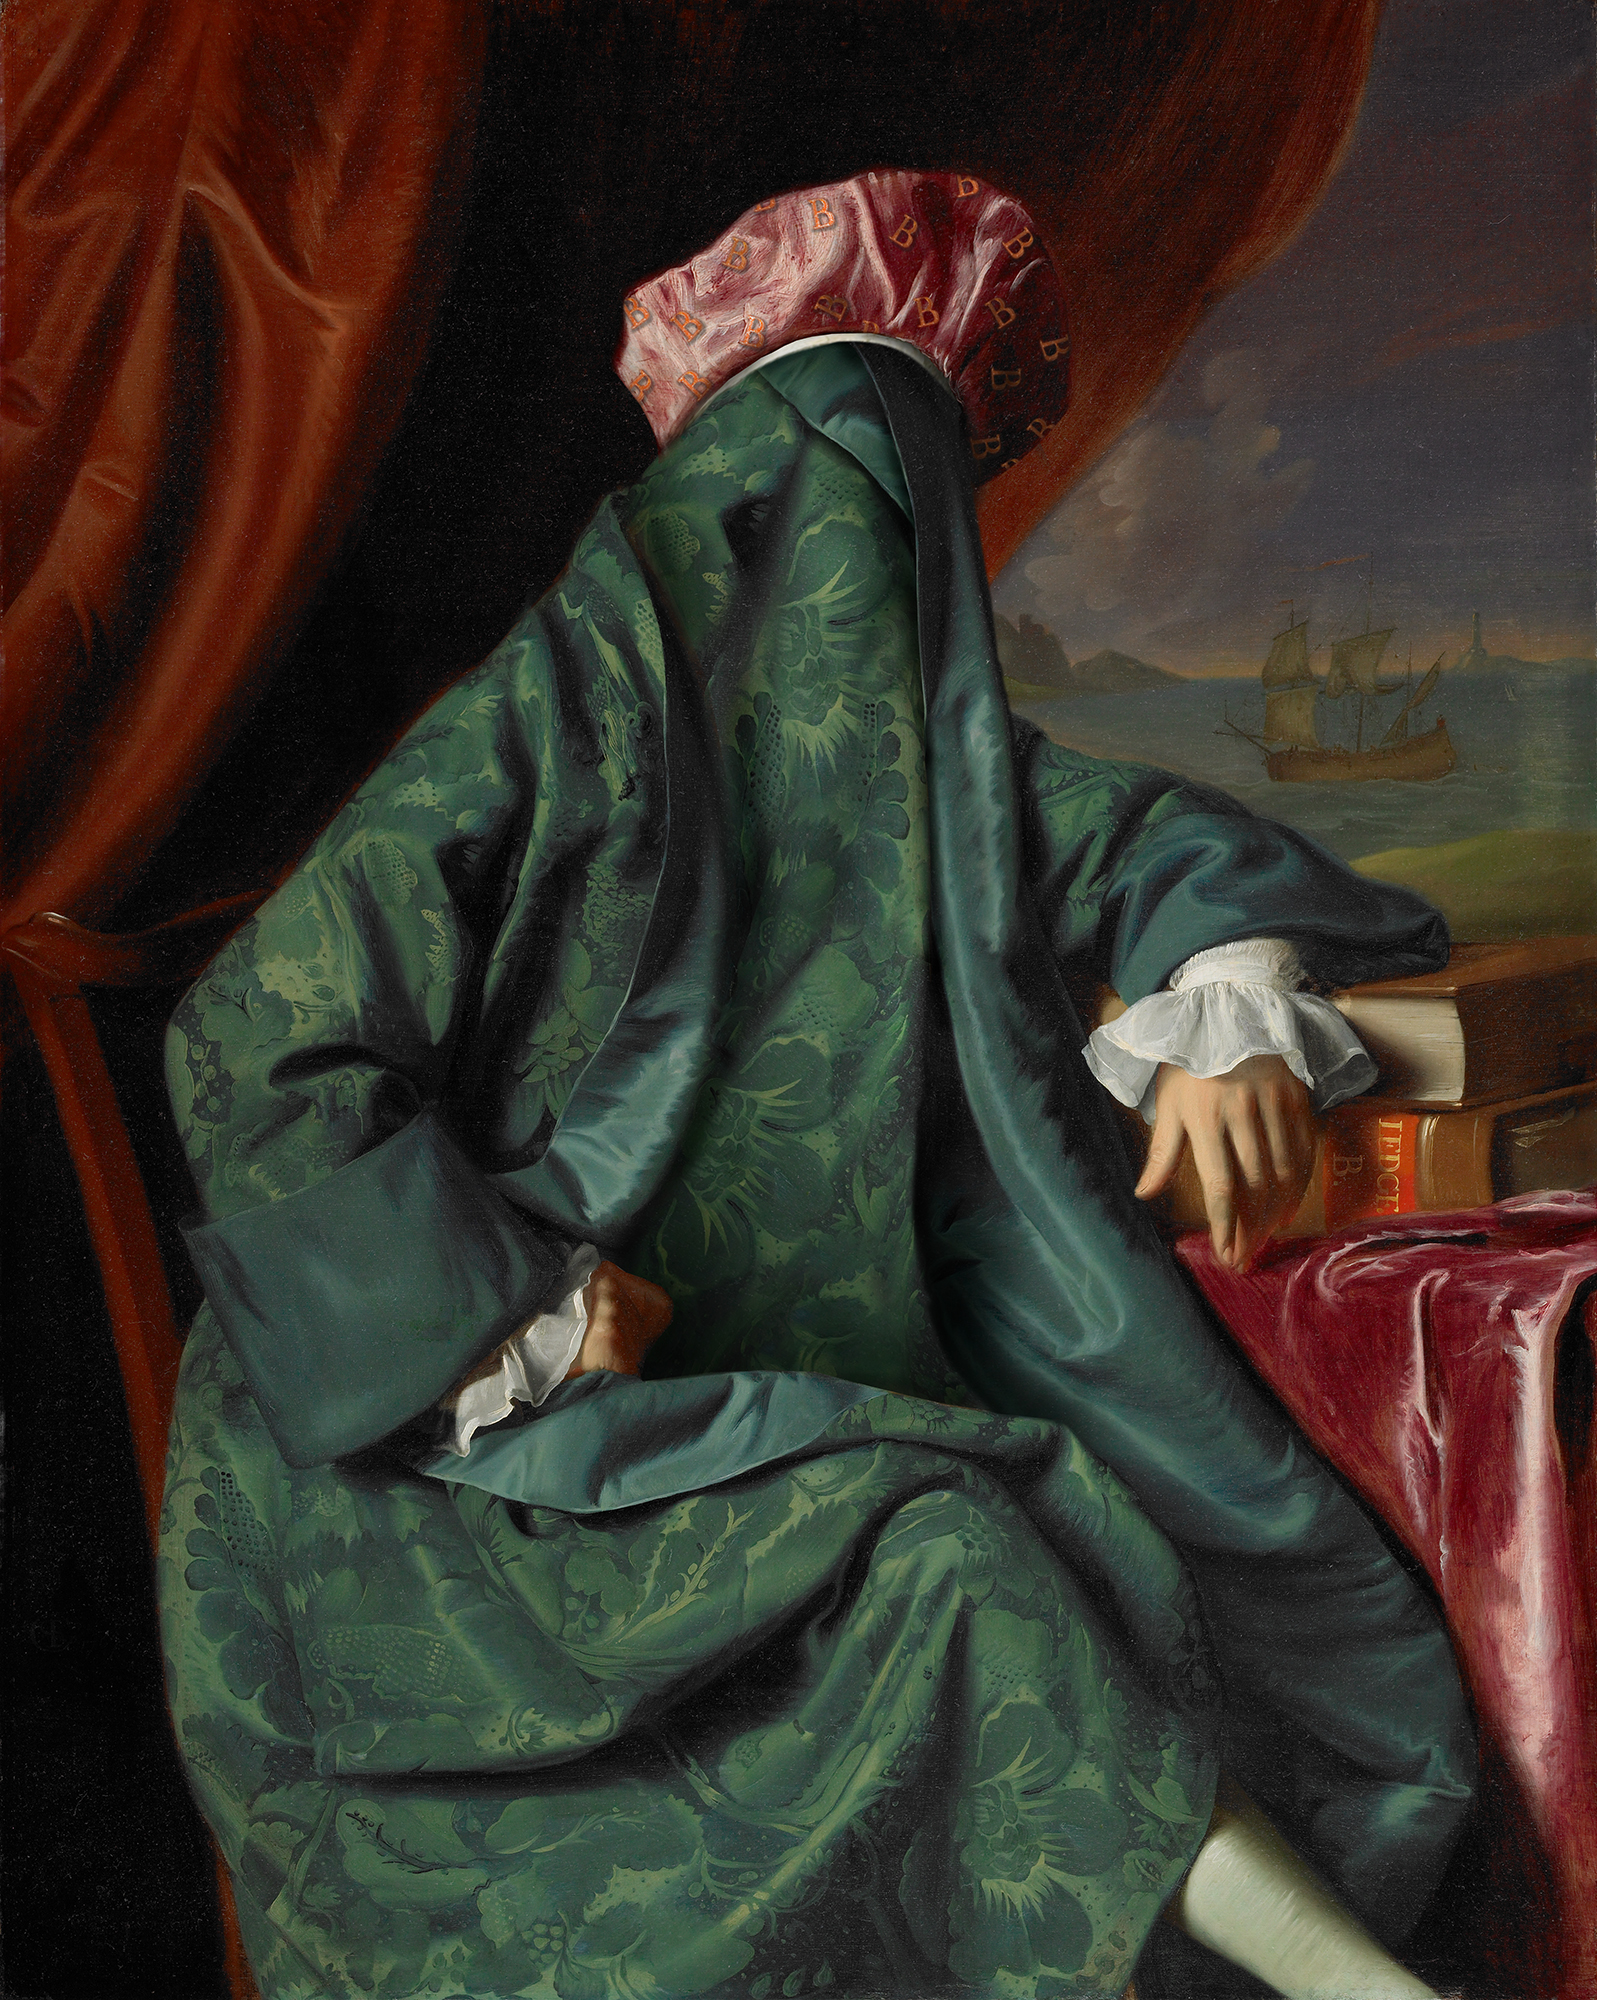 A digitally manipulated artwork by Copley of a man in a green robe so large that it covers his entire body.